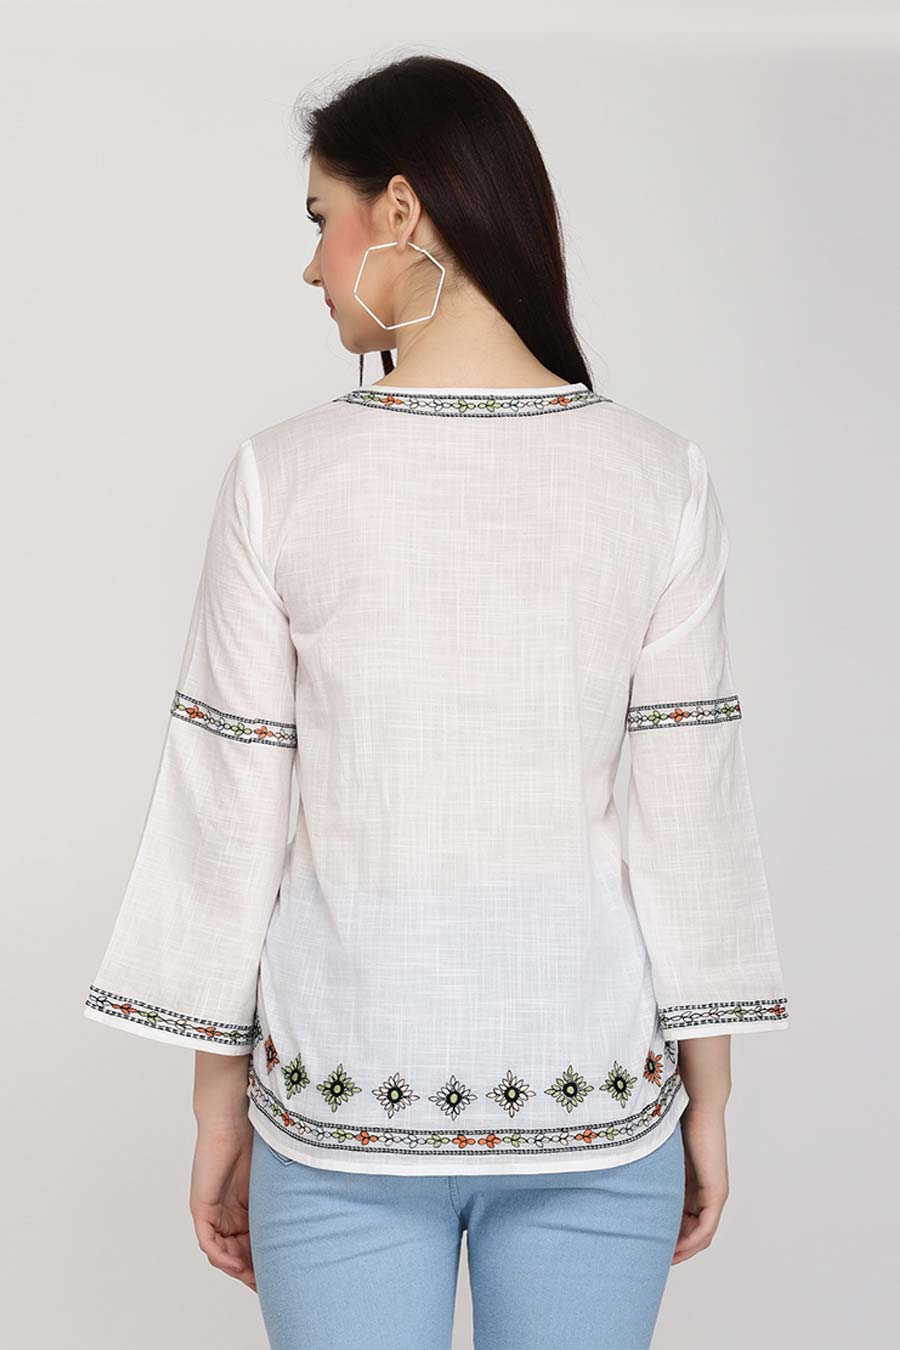 Classic White Embroidered Top